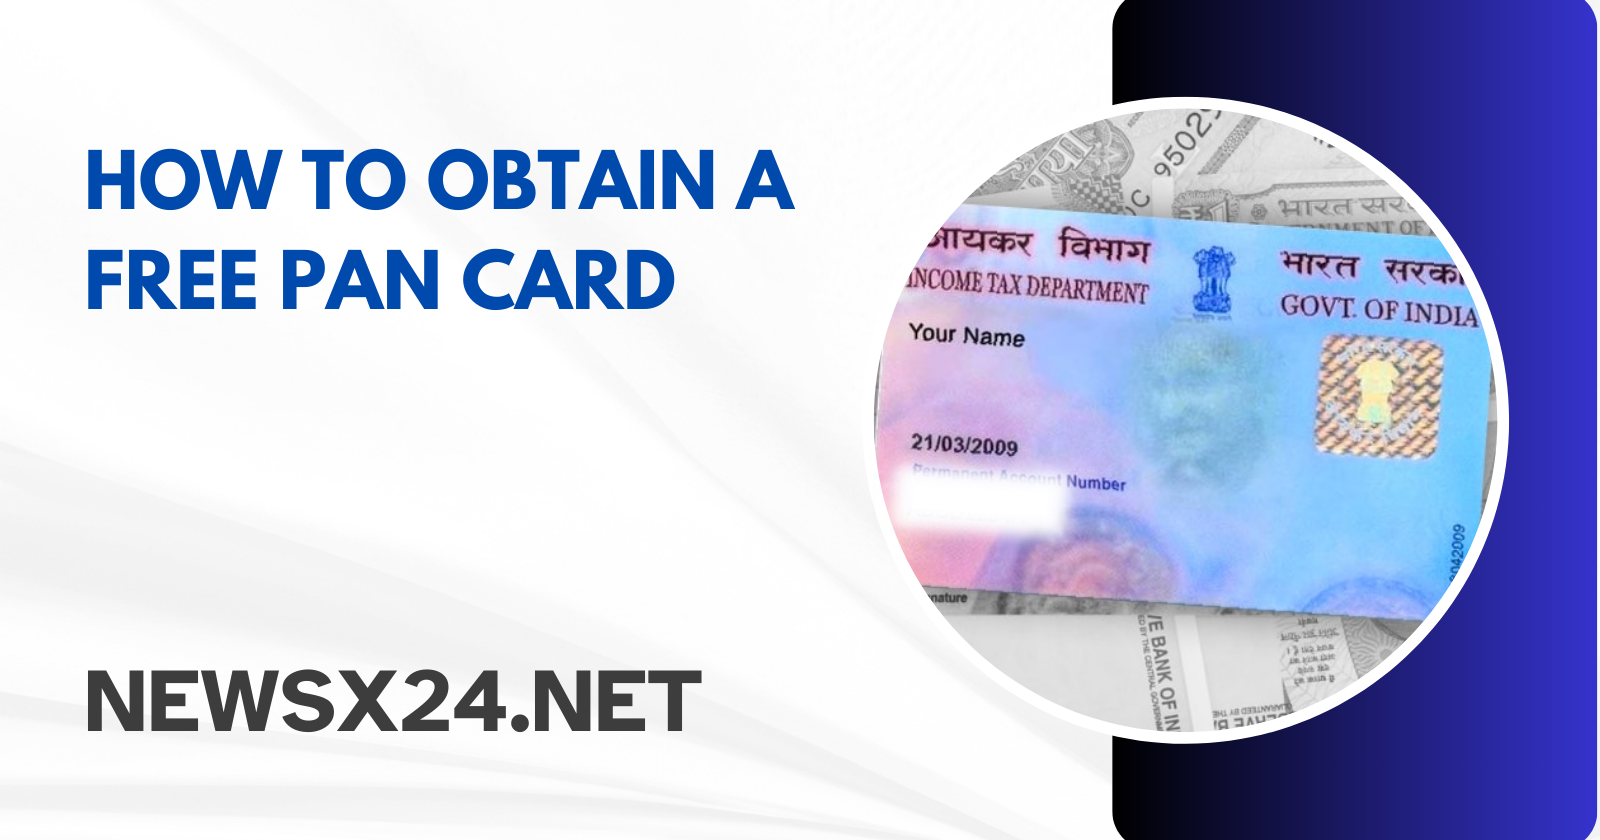 How to Obtain a Free PAN Card: Get Your PAN Card in Just 5 Minutes from Home